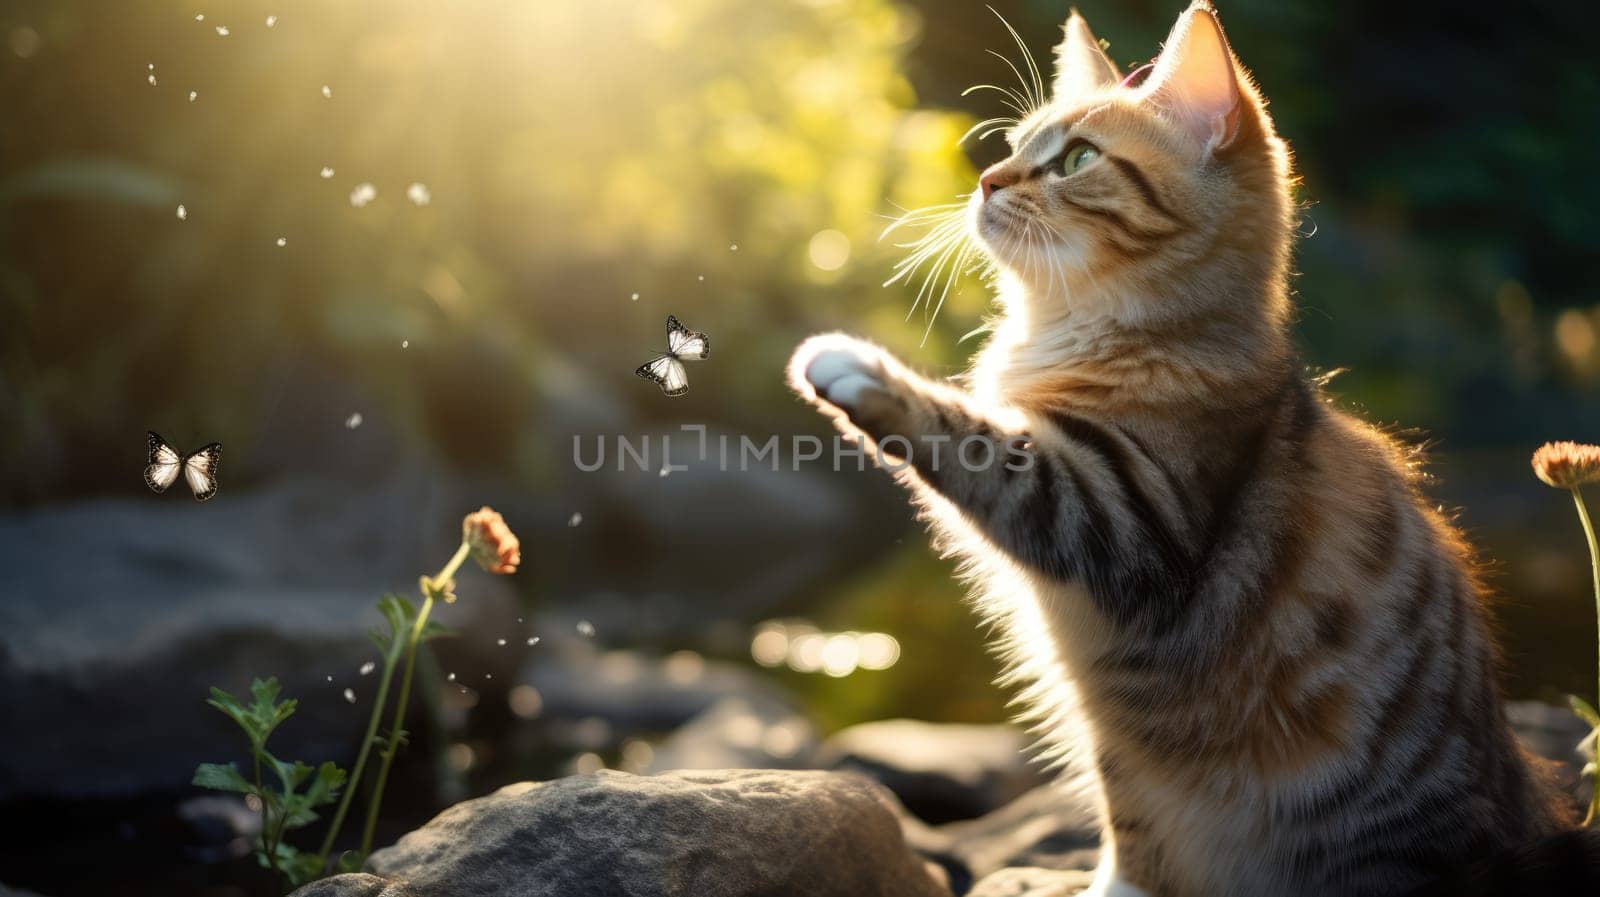 The cat catches a butterfly with its paw. Blurred sunny background by natali_brill